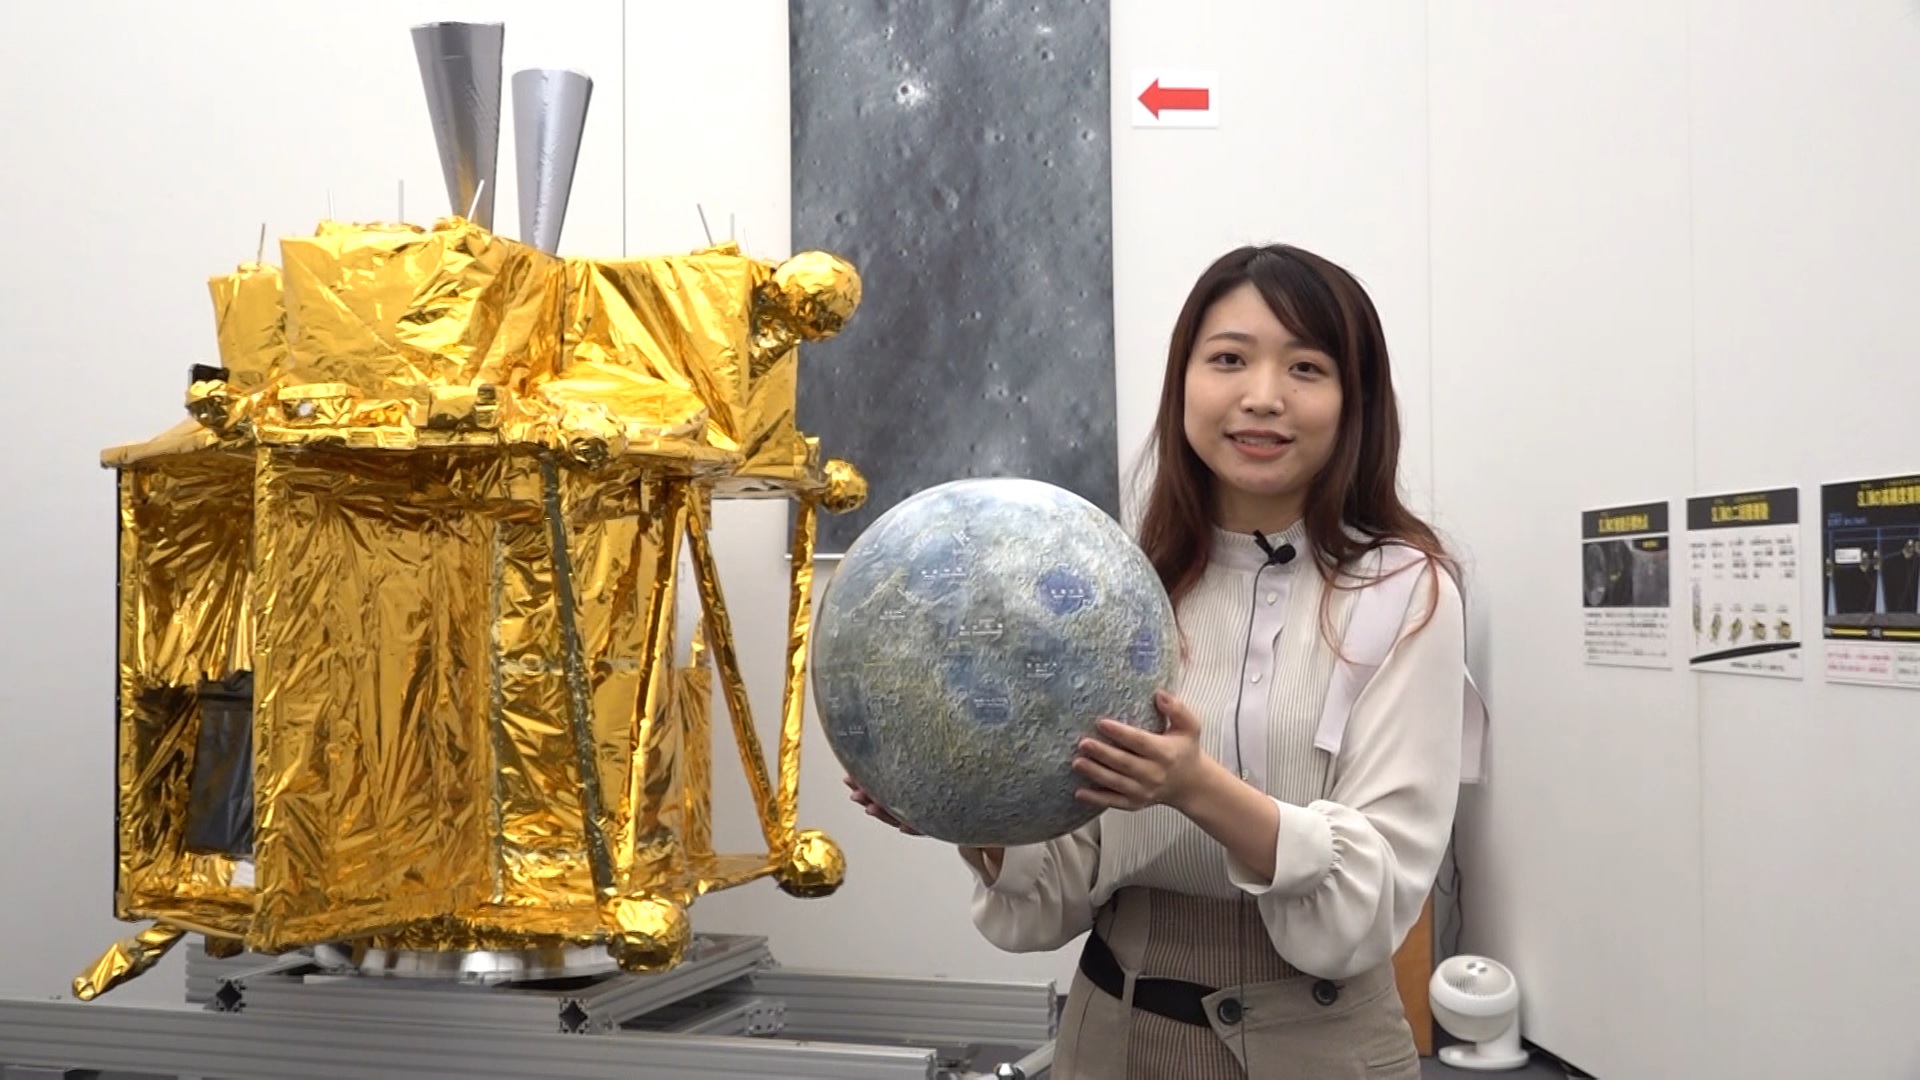 Photo of young woman holding spherical object in front of exhibit model of spacecraft in gold foil.